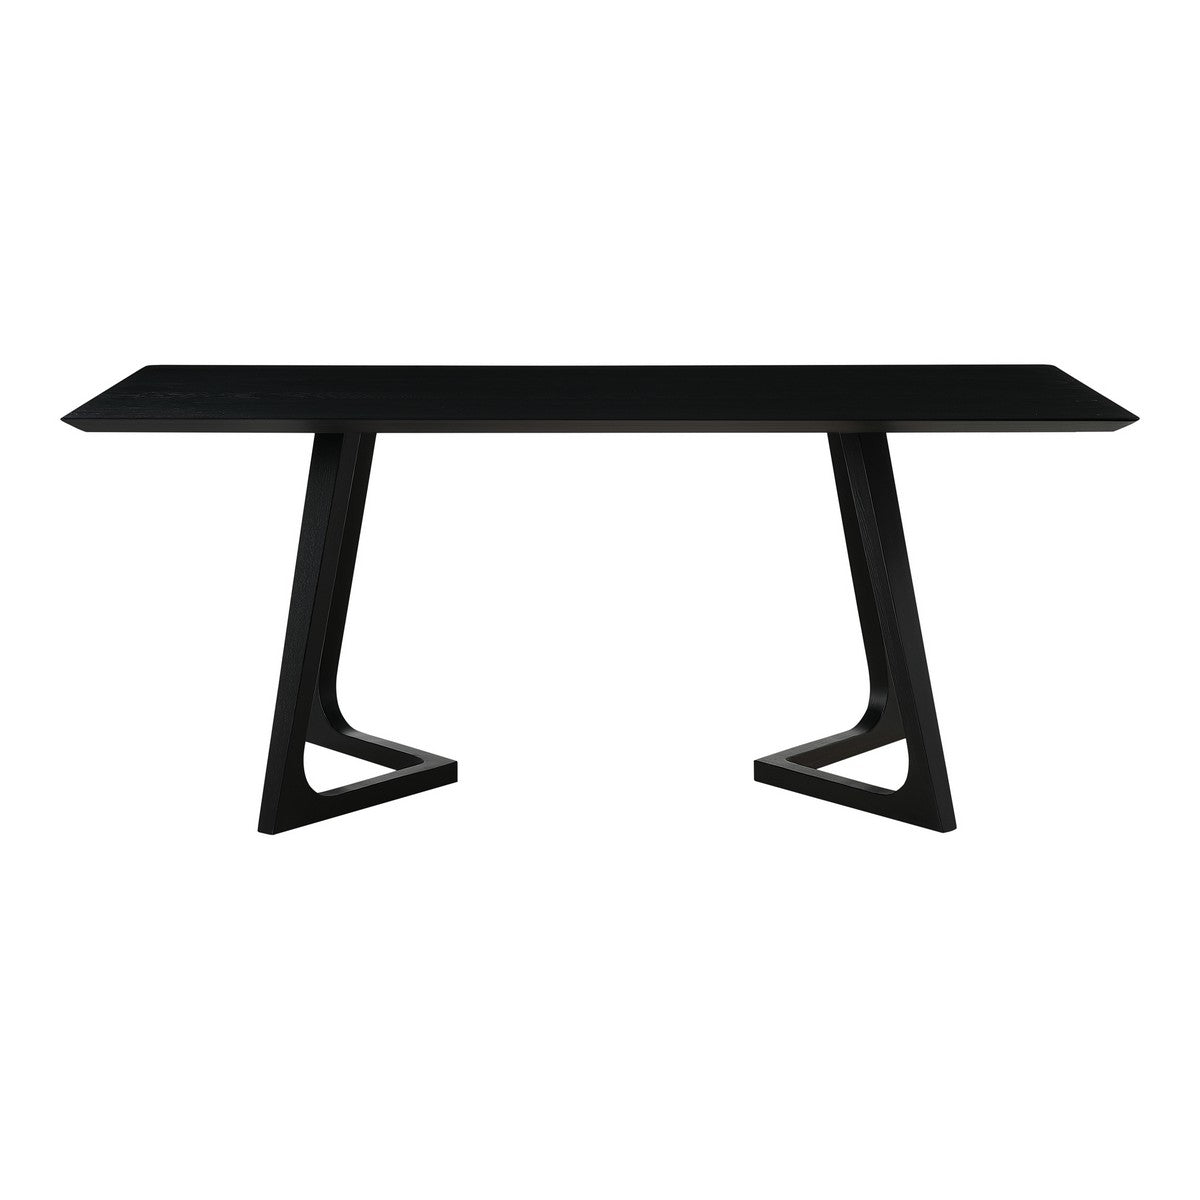 Moe's Home Collection Godenza Dining Table Rectangular Black Ash - CB-1004-02 - Moe's Home Collection - Dining Tables - Minimal And Modern - 1